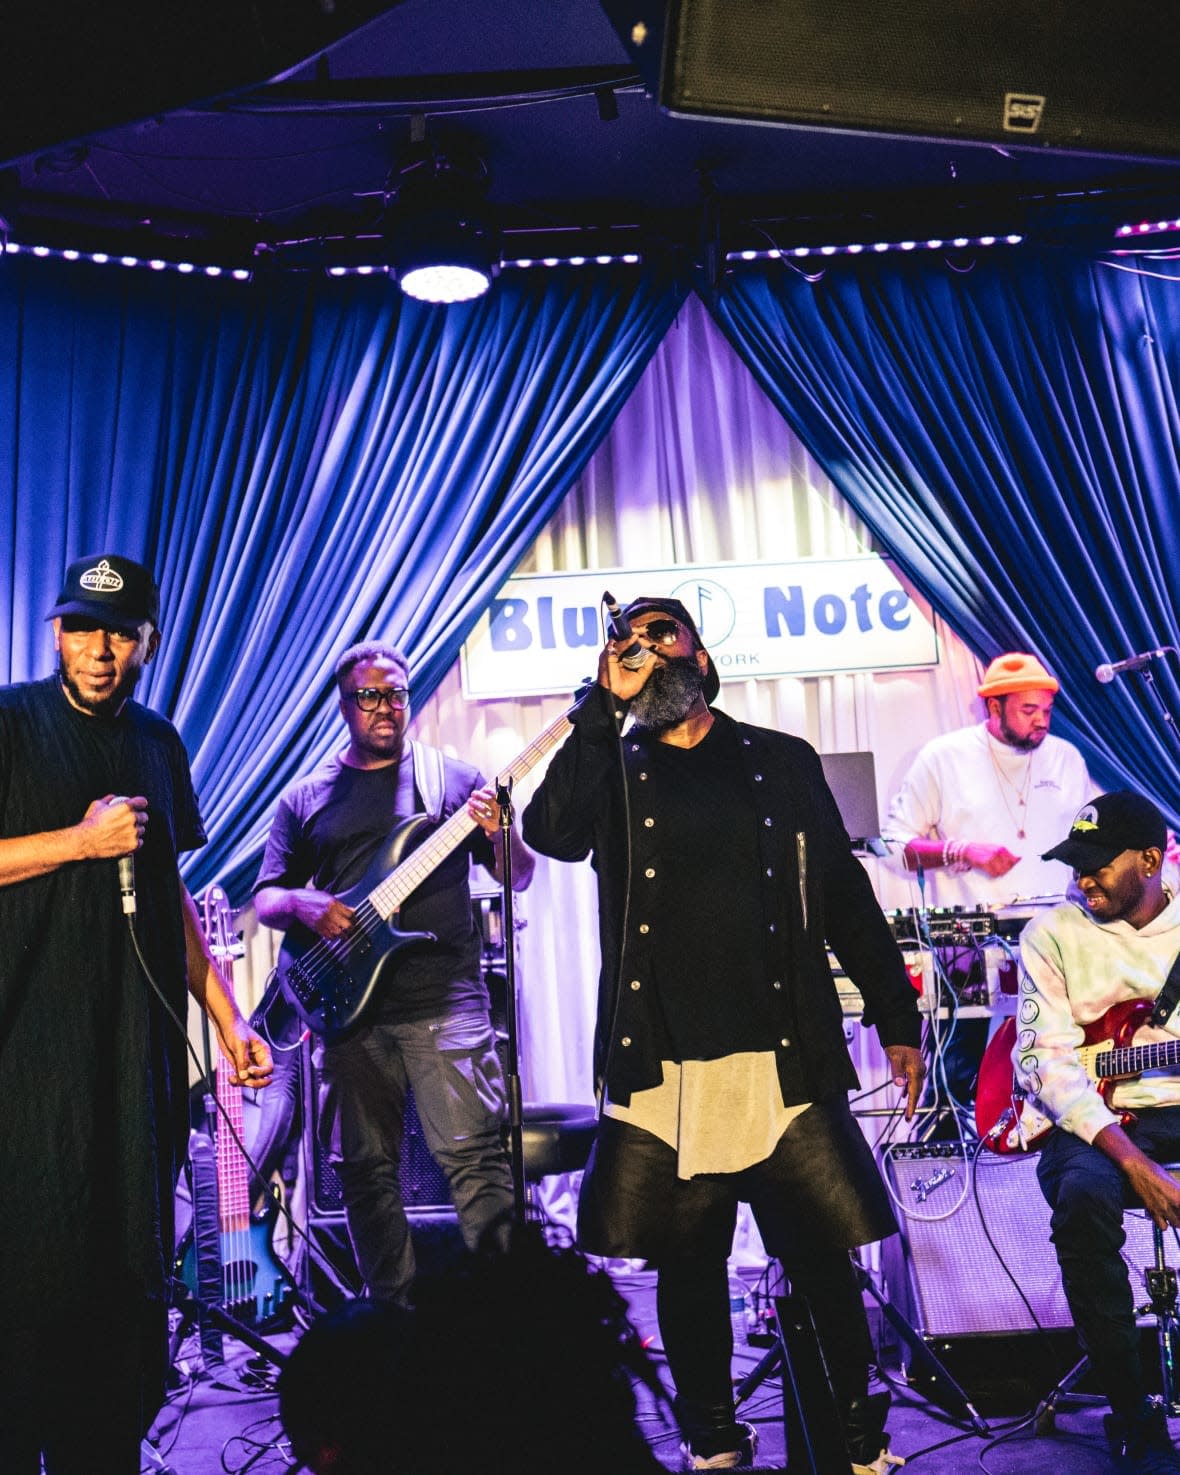 Yasiin Bey, Derrick Hodge, Black Thought, Jahi Sundance and Isaiah Sharkey are in concert at the Blue Note Jazz Club. (Photo provided by Shore Fire Media)